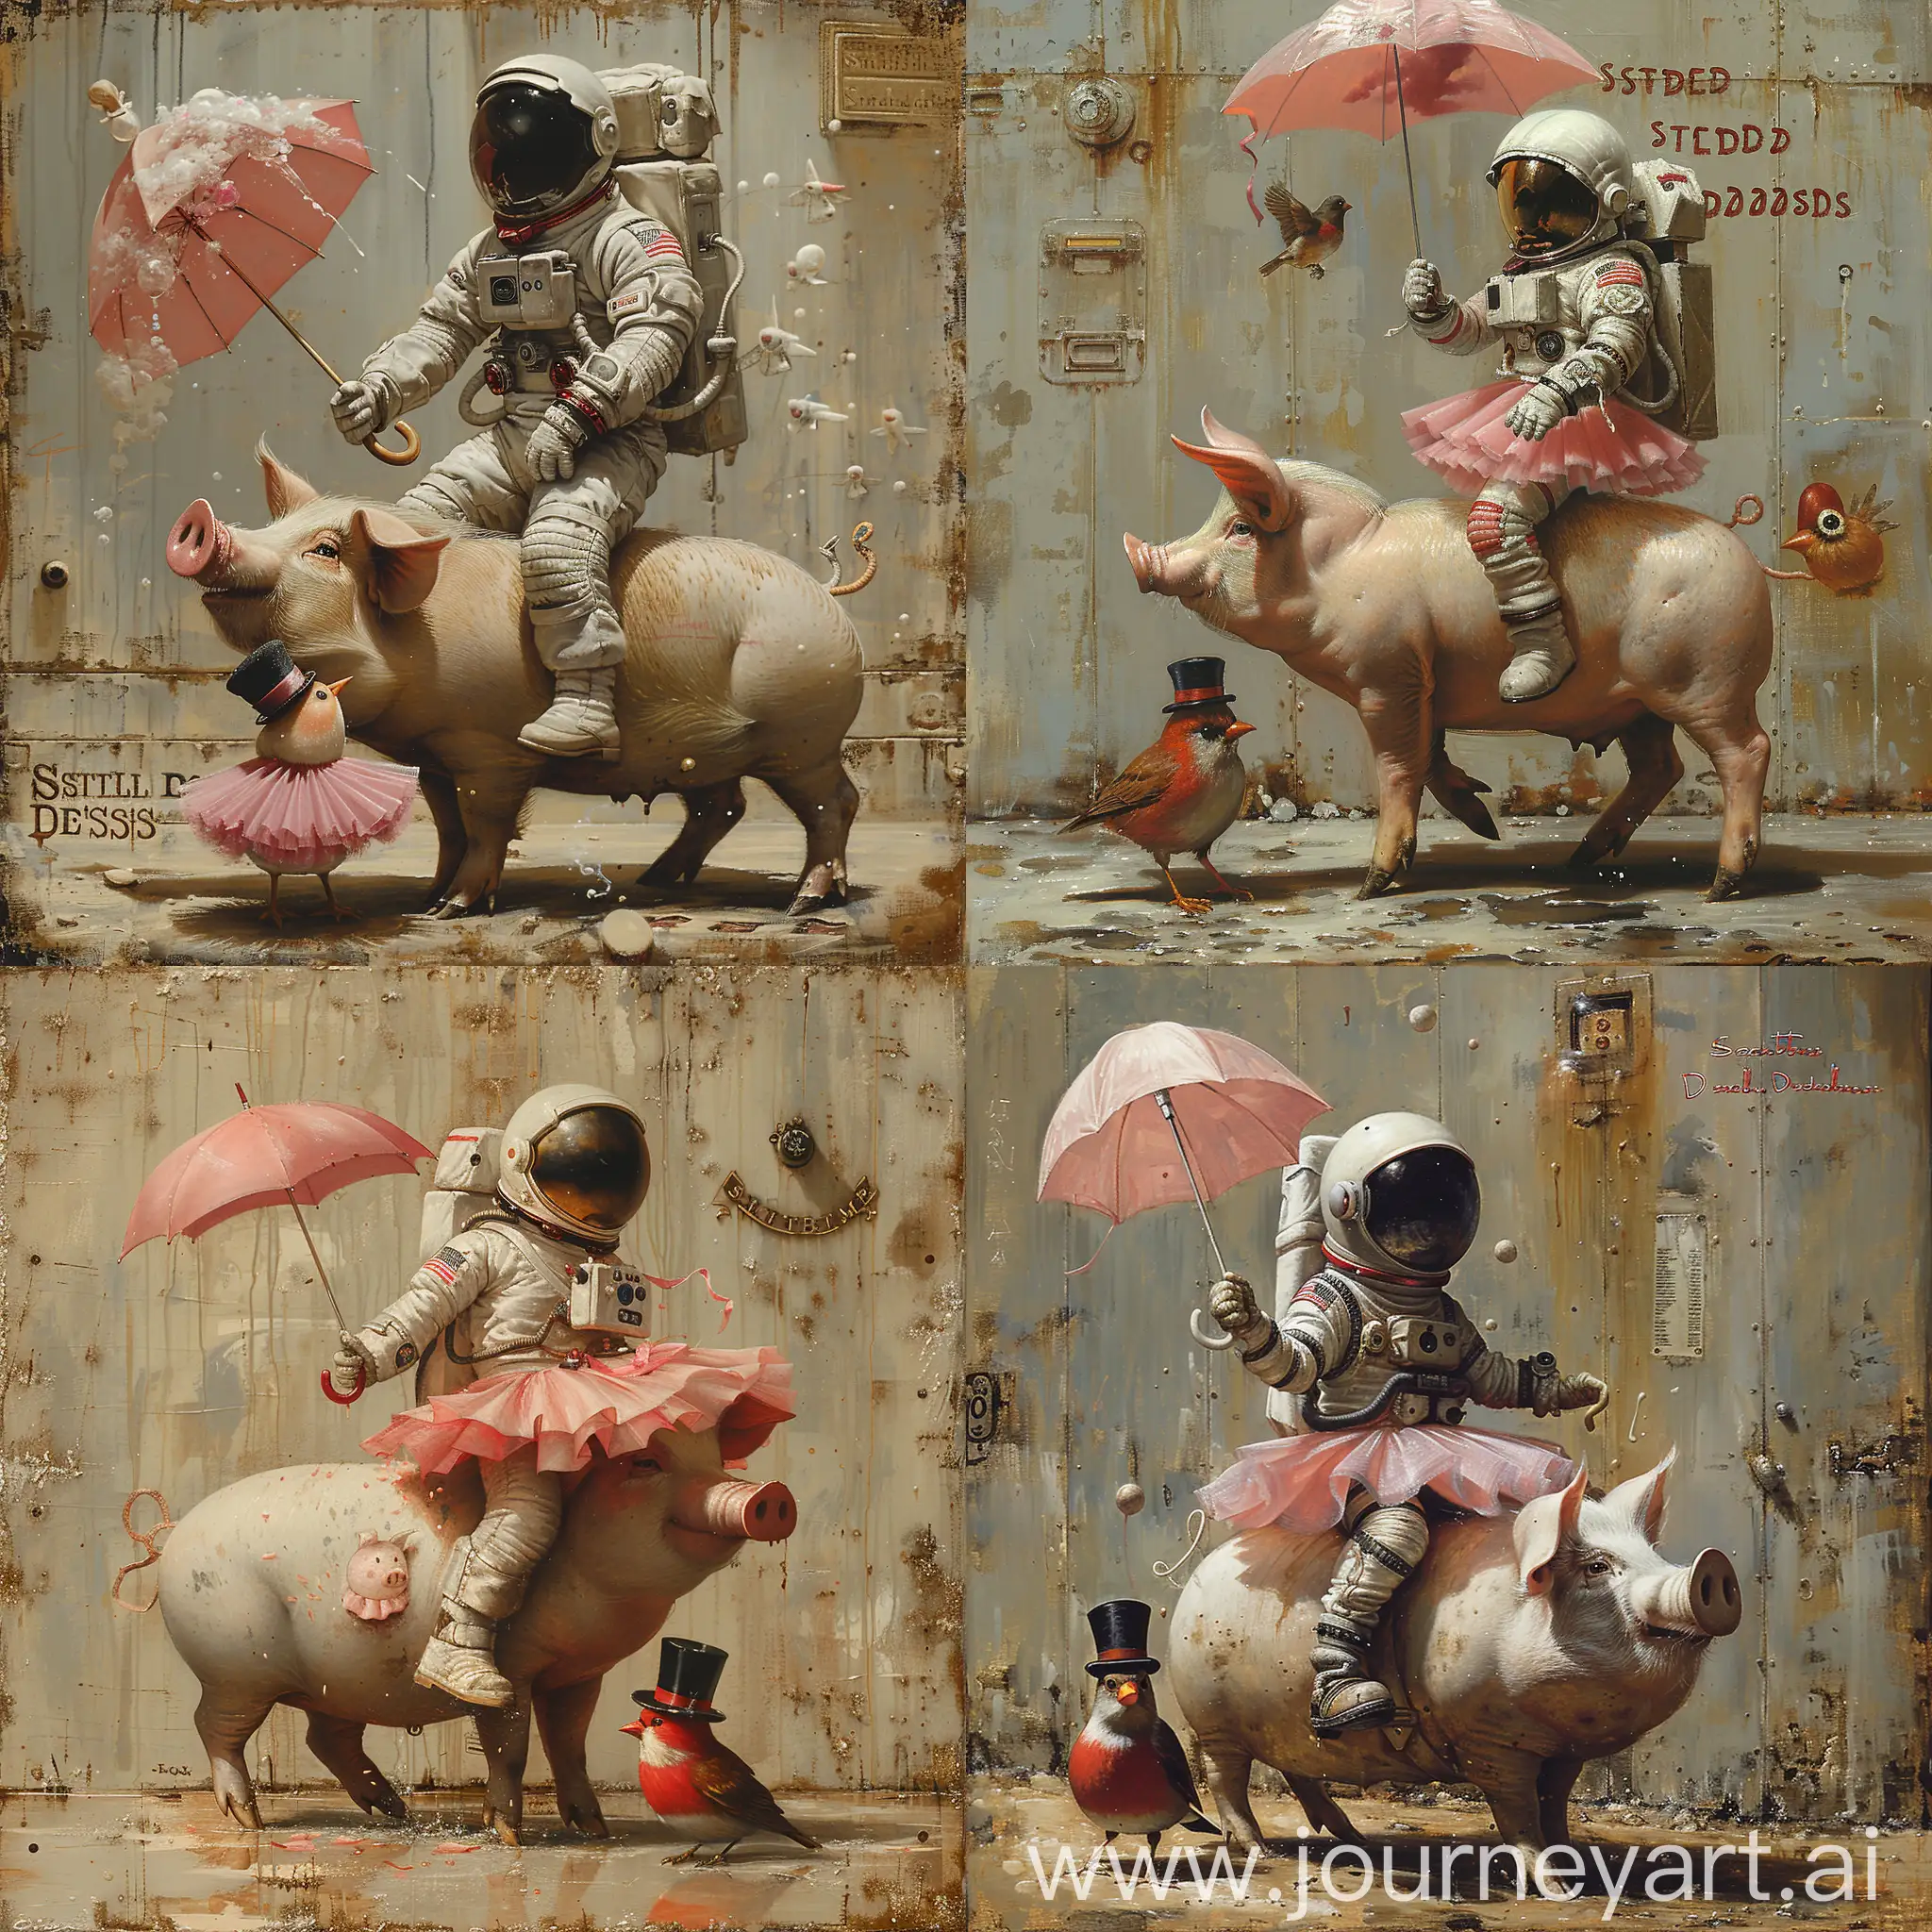 Whimsical-Astronaut-Riding-Pig-with-Tutu-and-Pink-Umbrella